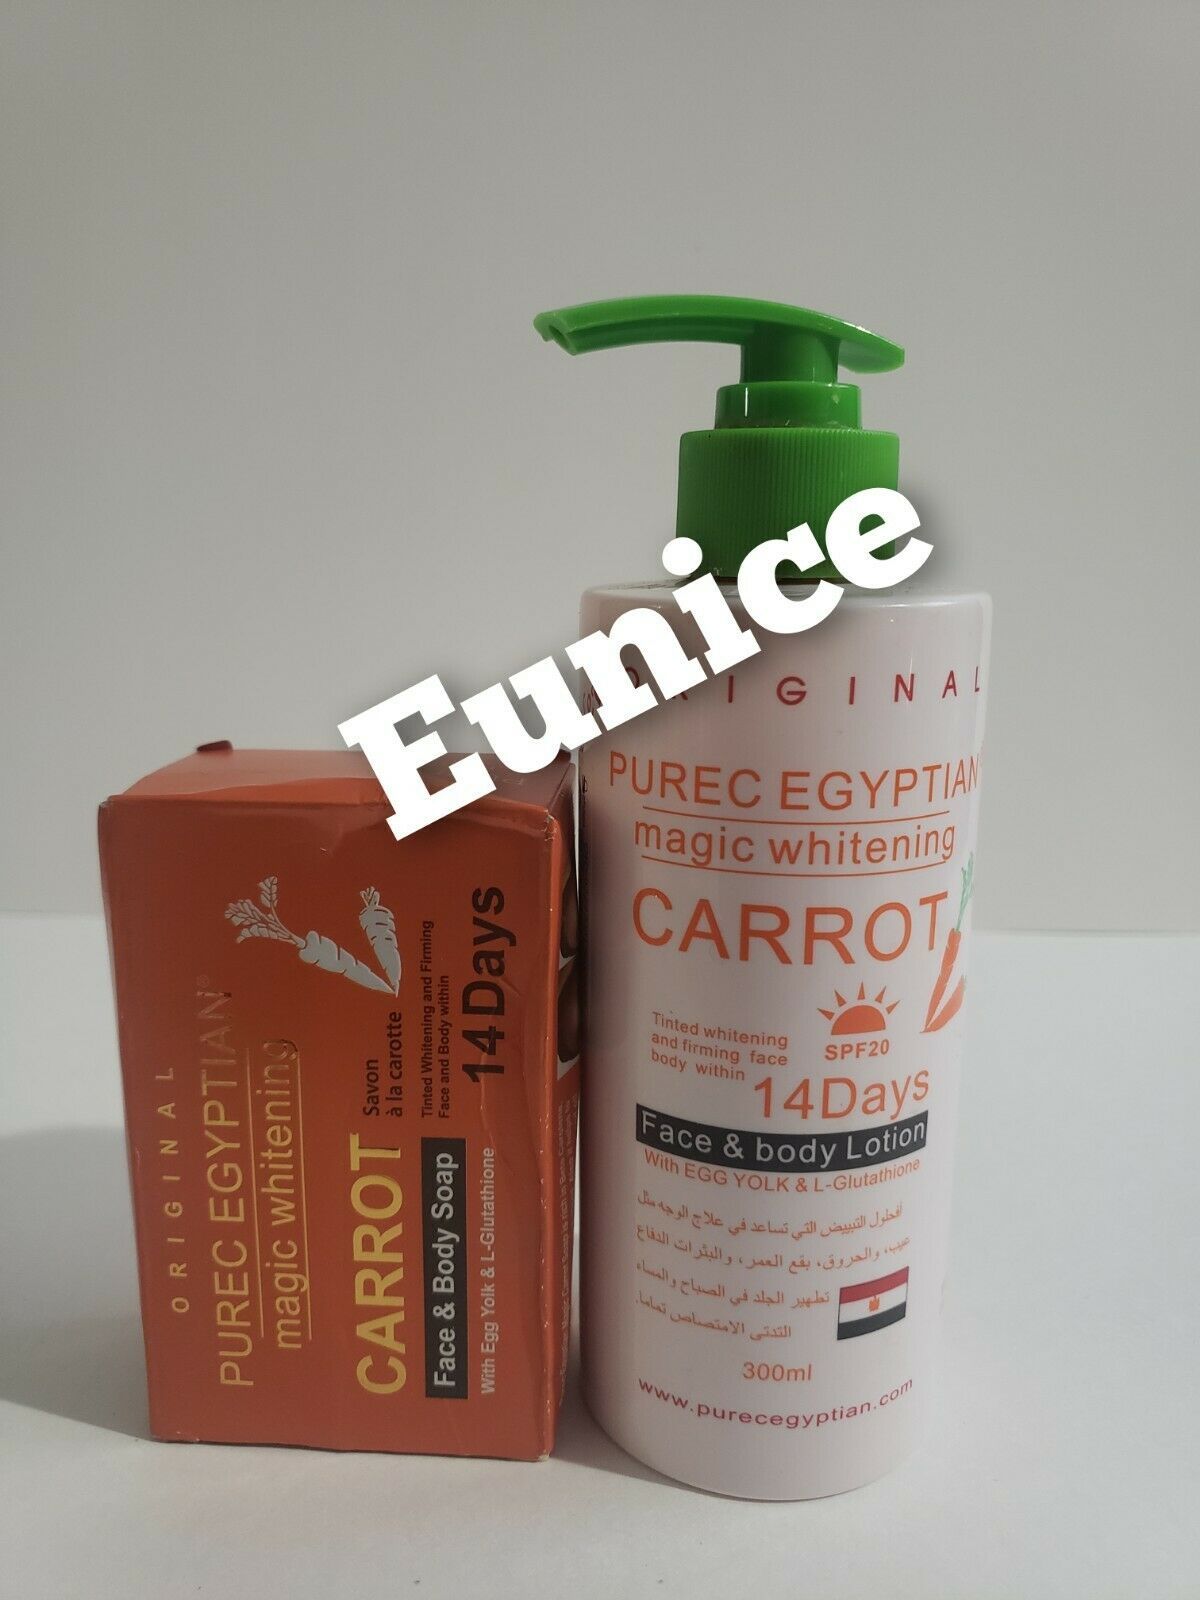 purec egyptian magic whitening Carrot lotion and soap. 14 days action.spf 20 - $55.99